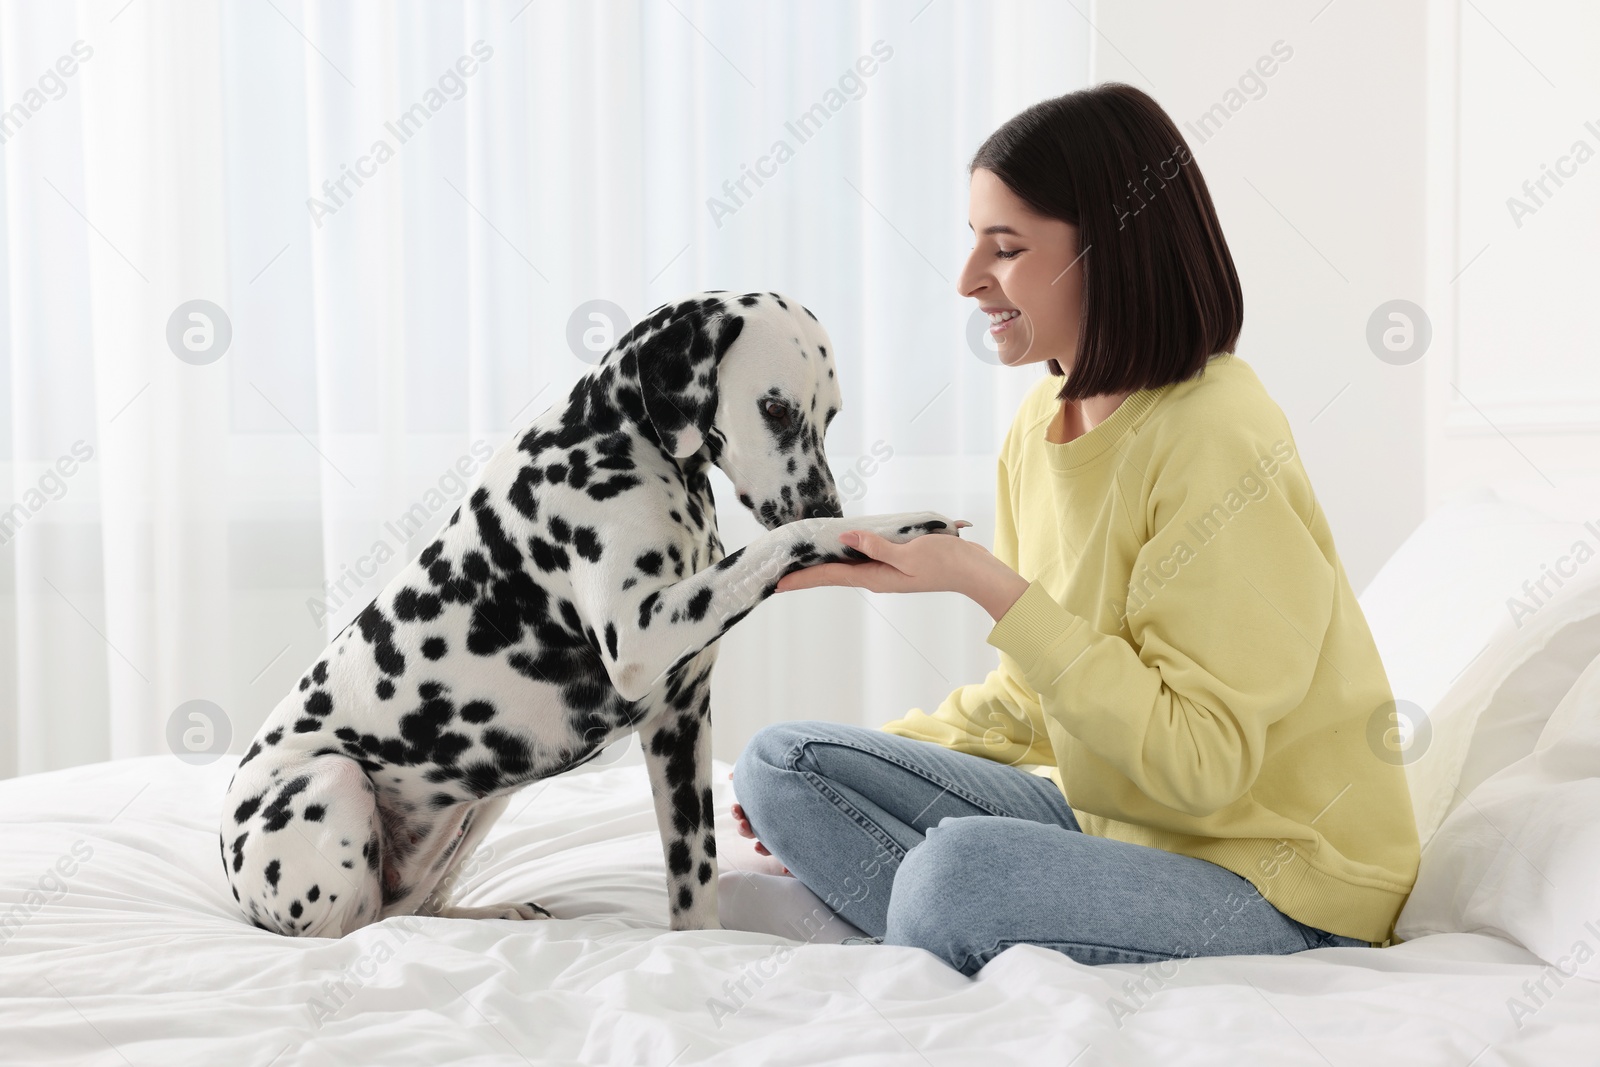 Photo of Adorable Dalmatian dog giving paw to happy woman on bed at home. Lovely pet